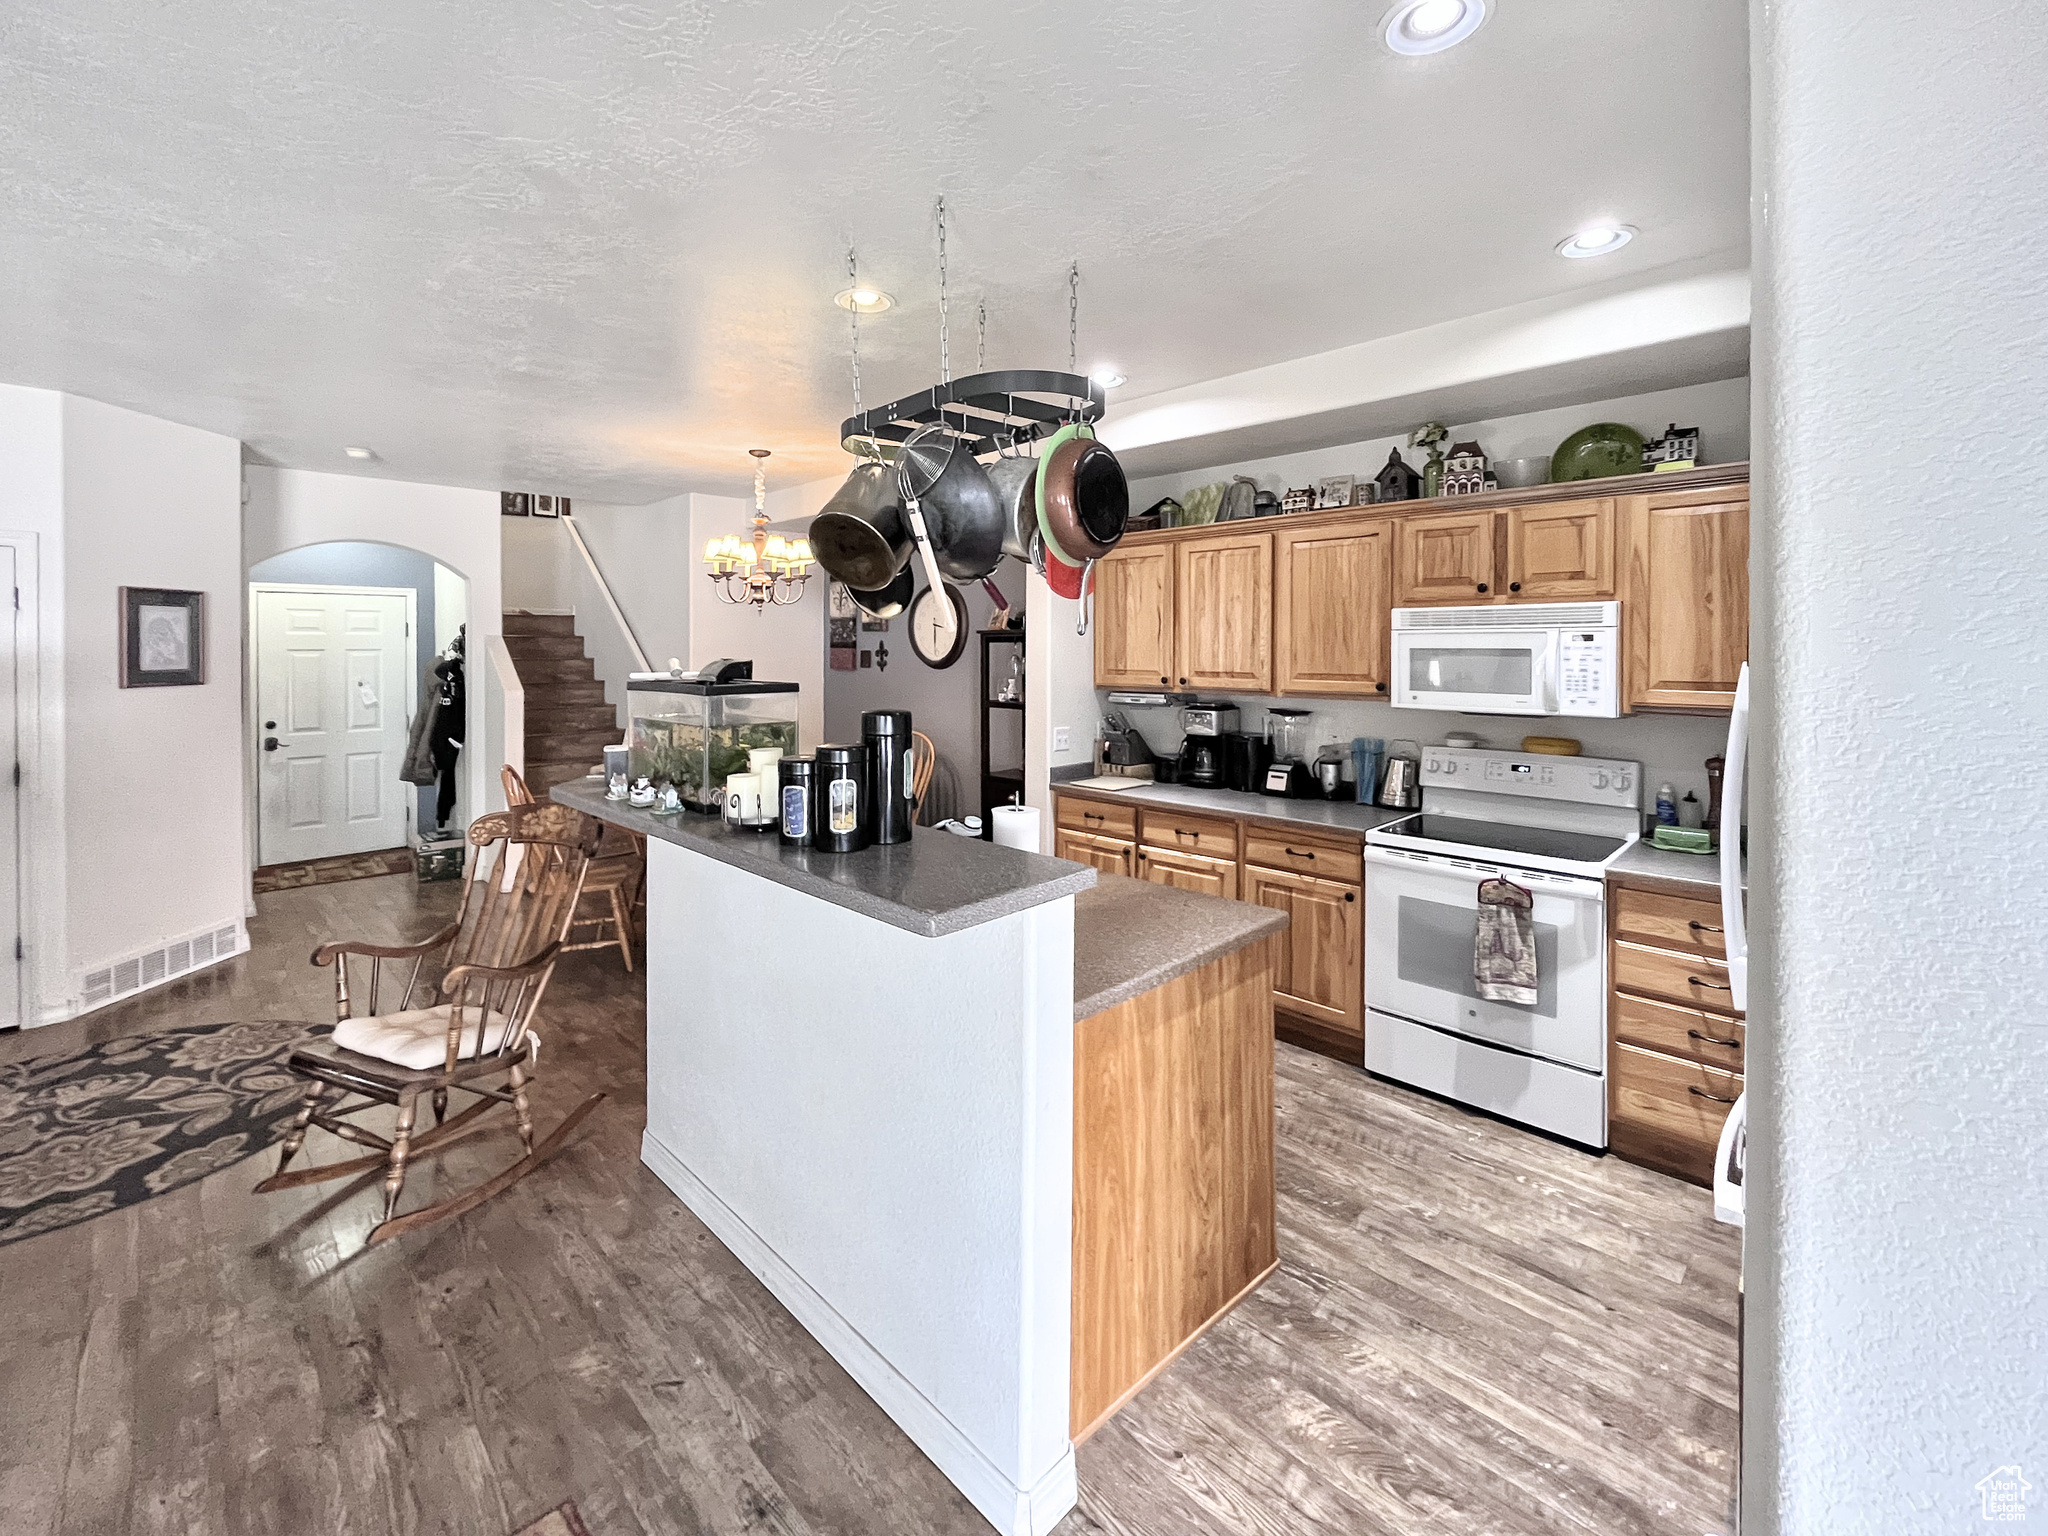 Kitchen featuring maple cabinets, convenient appliances, a kitchen island, and beautiful flooring